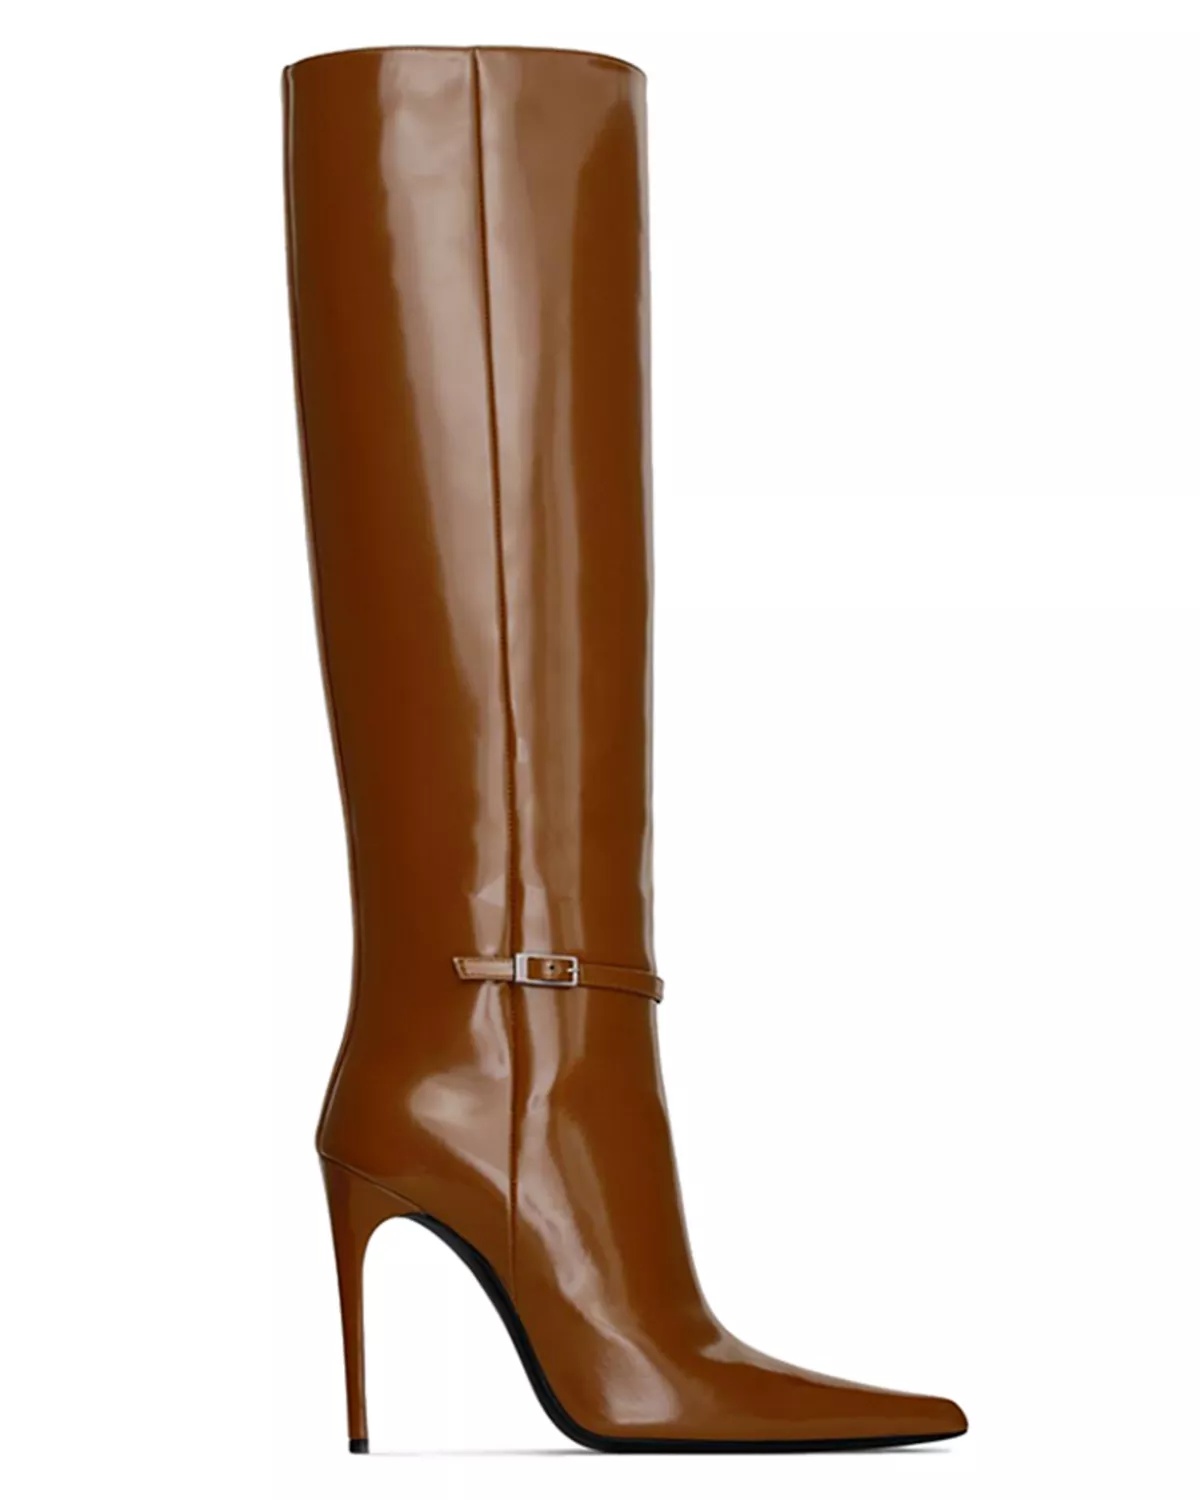 Vendome Boots in Glazed Leather - 1